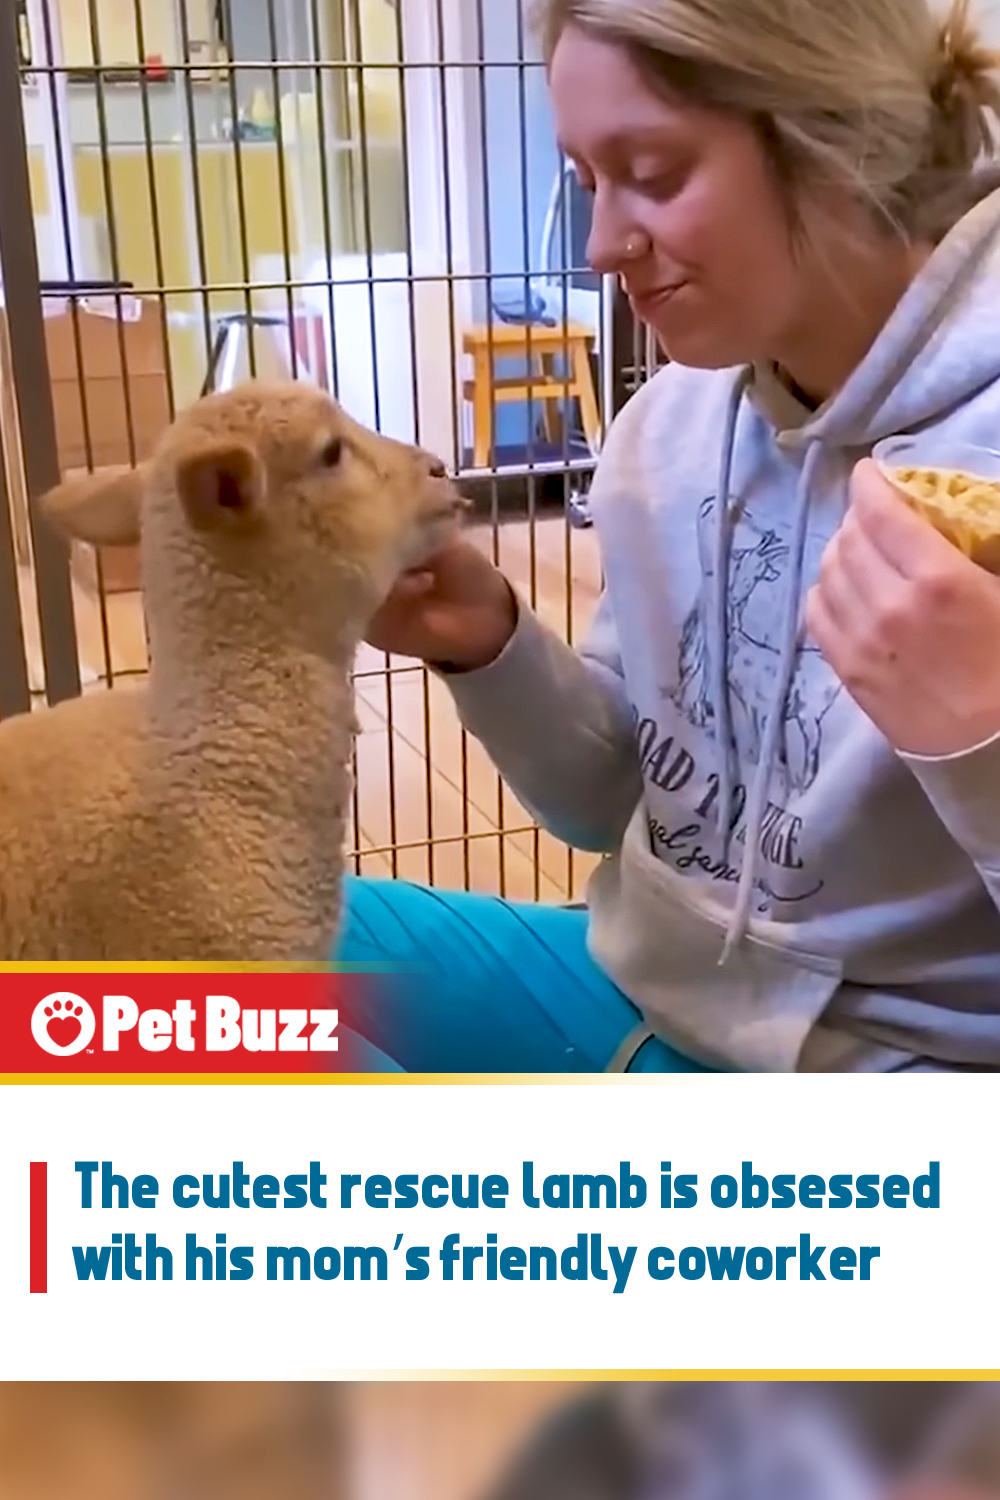 The cutest rescue lamb is obsessed with his mom’s friendly coworker